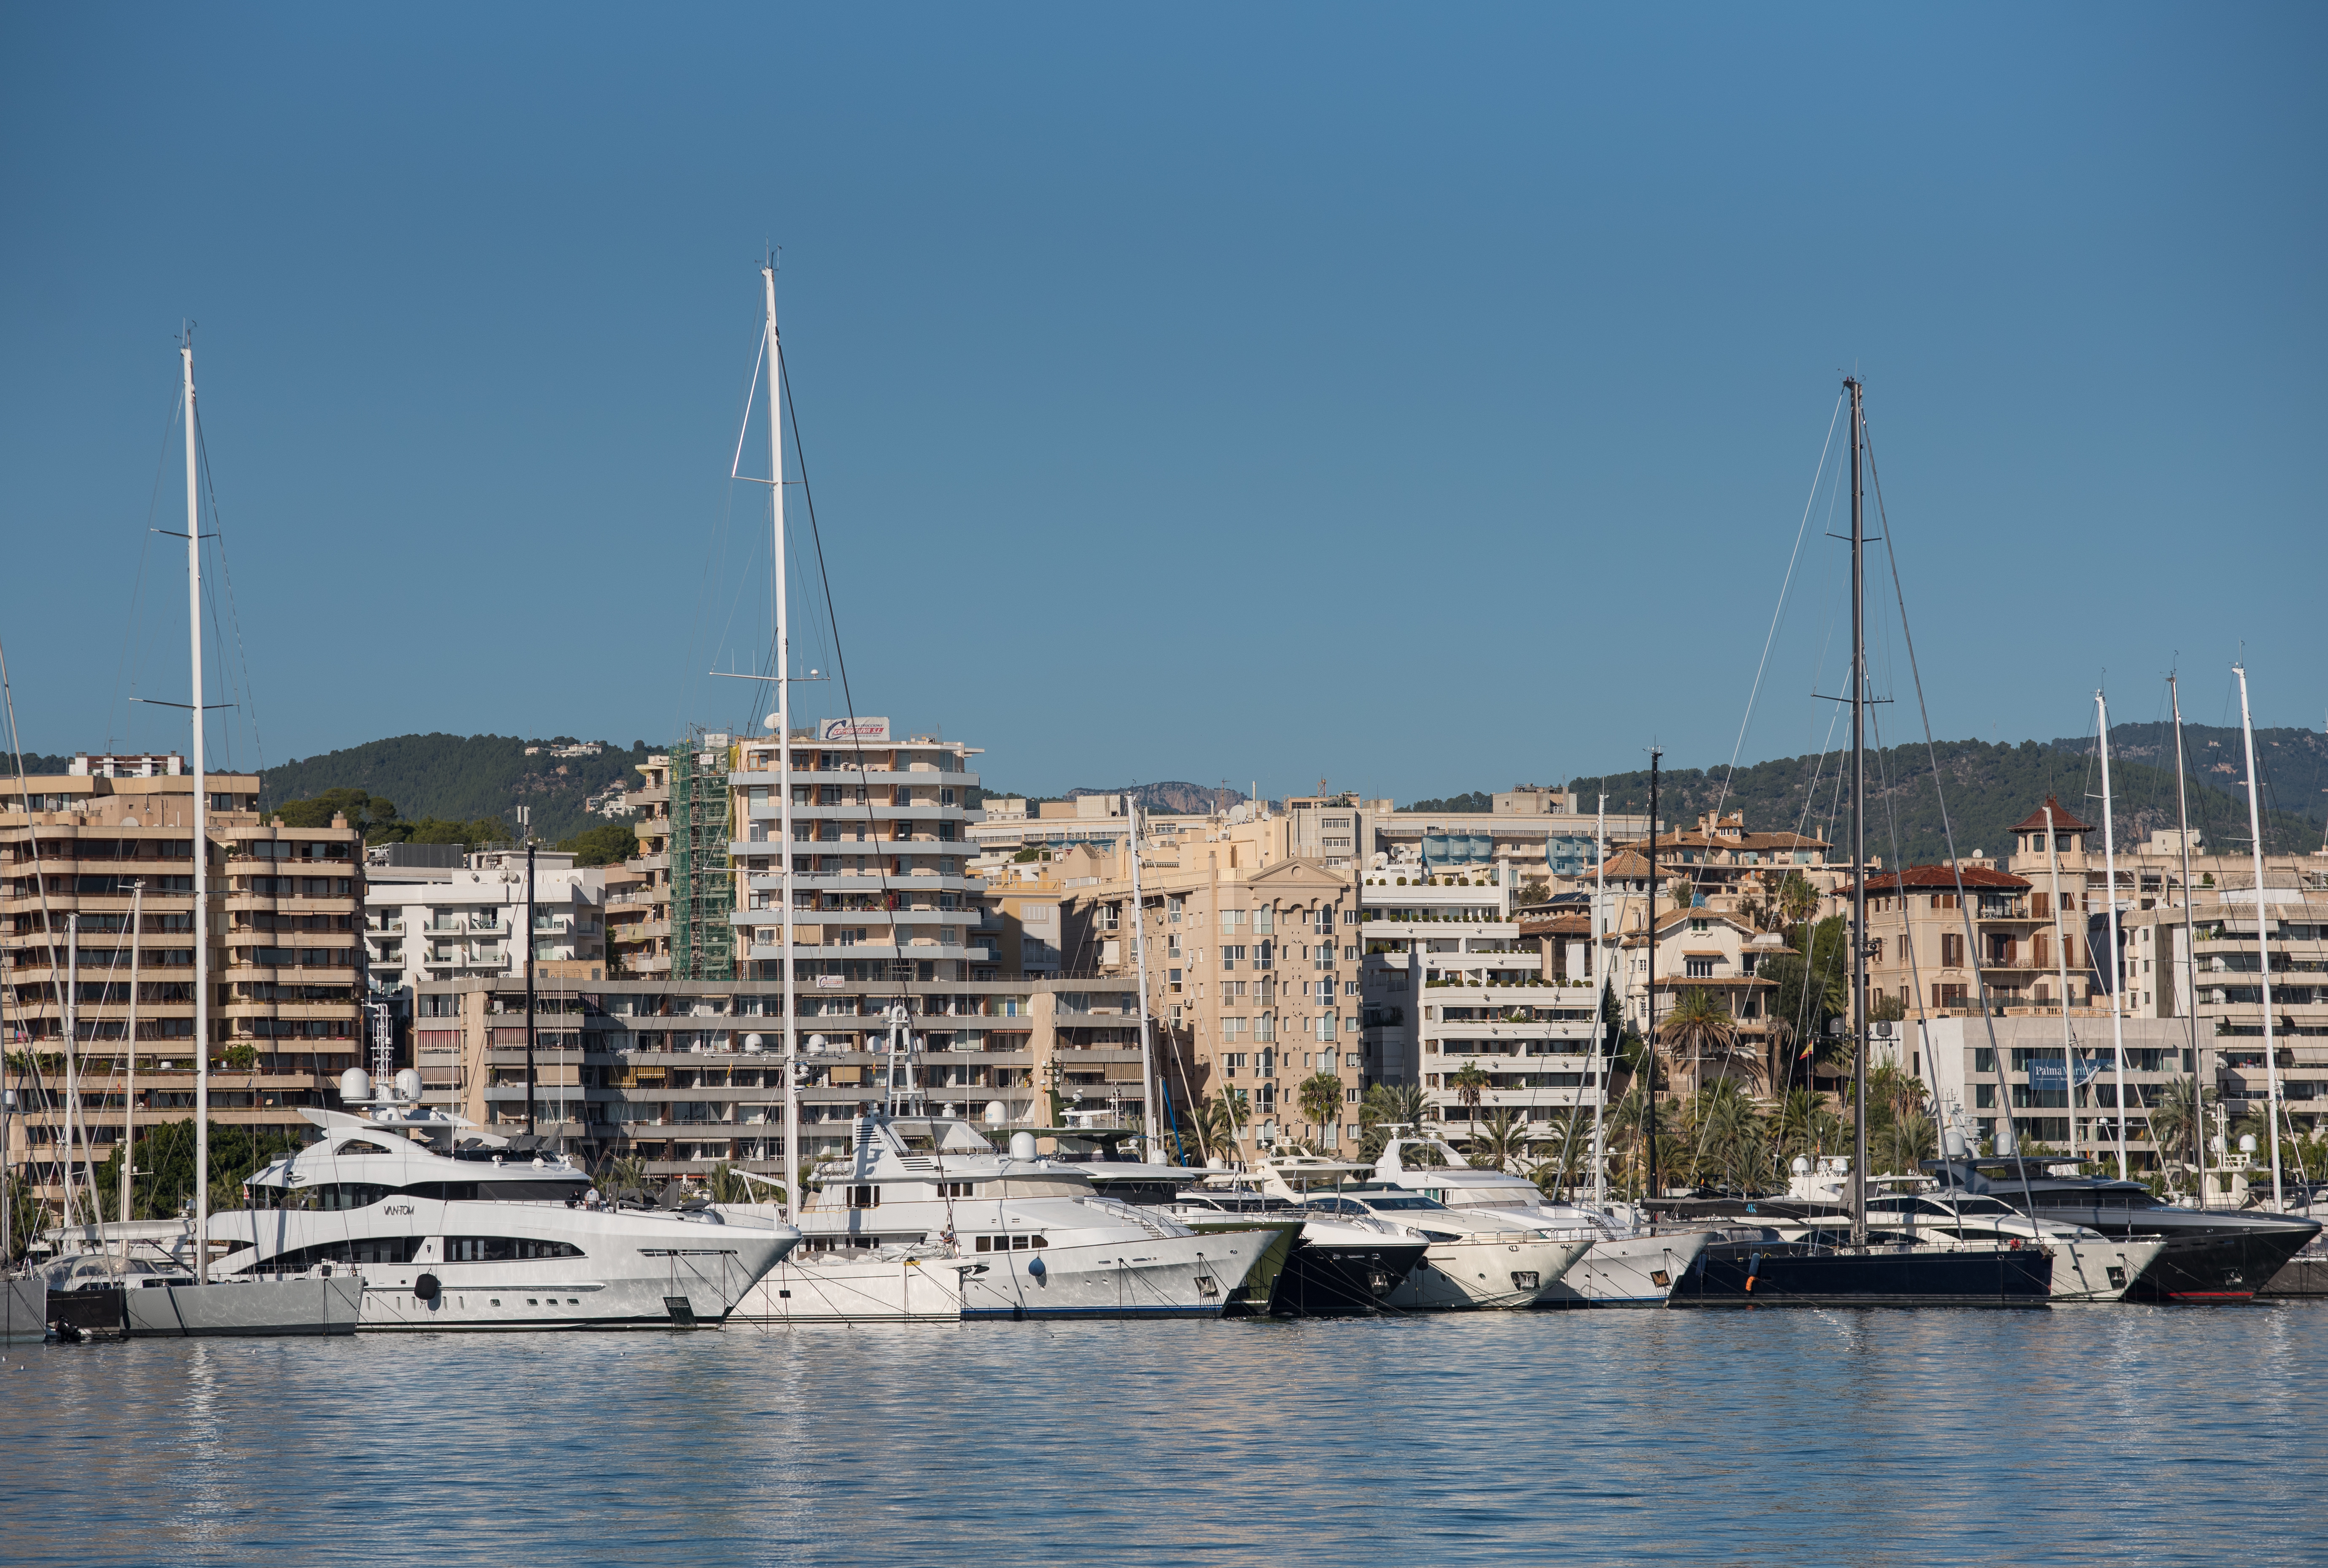 The APB launches a public tender to manage two facilities for mooring recreational boats in the port of Palma